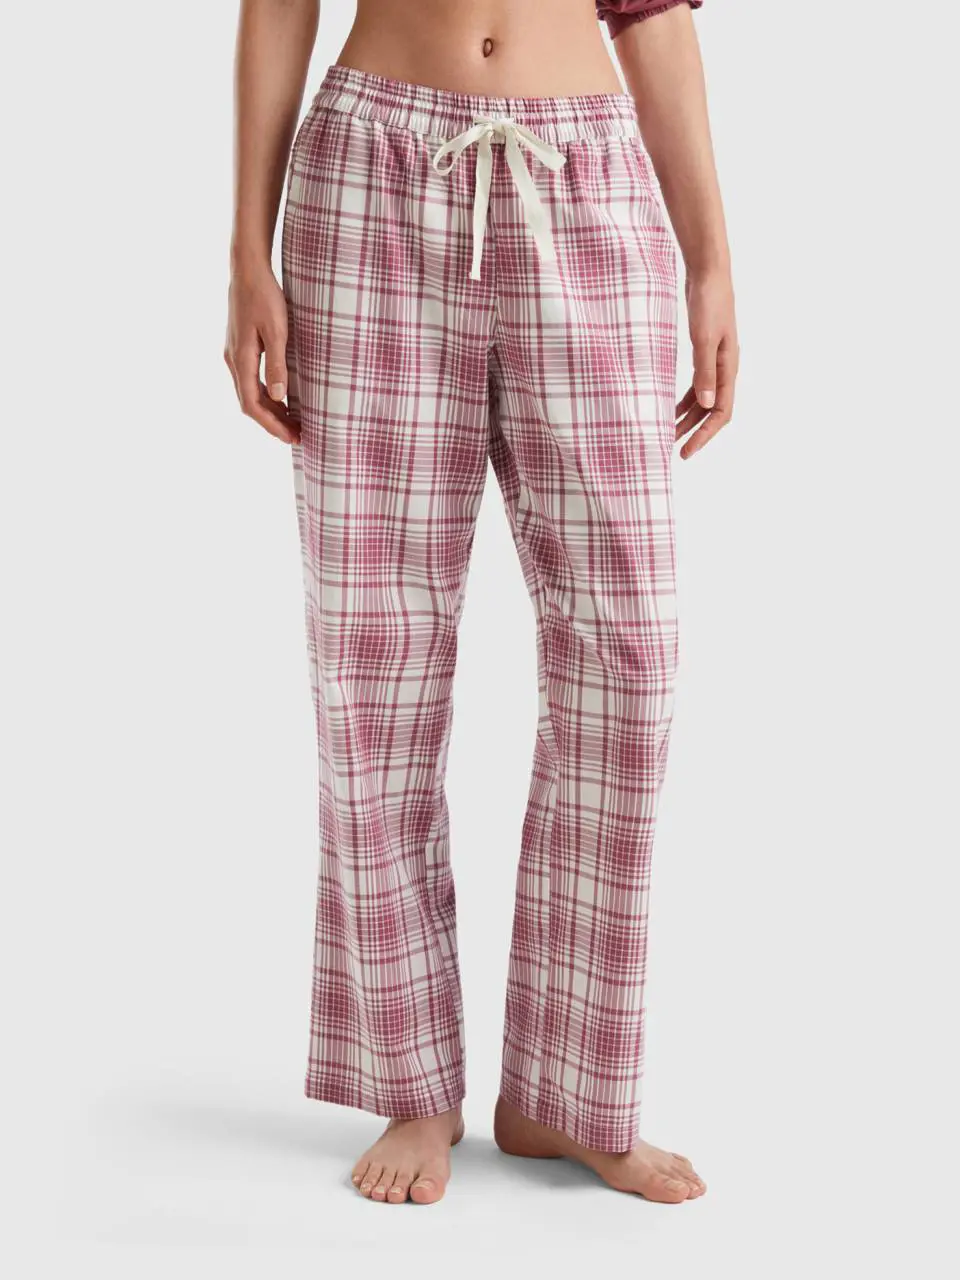 Benetton check trousers. 1